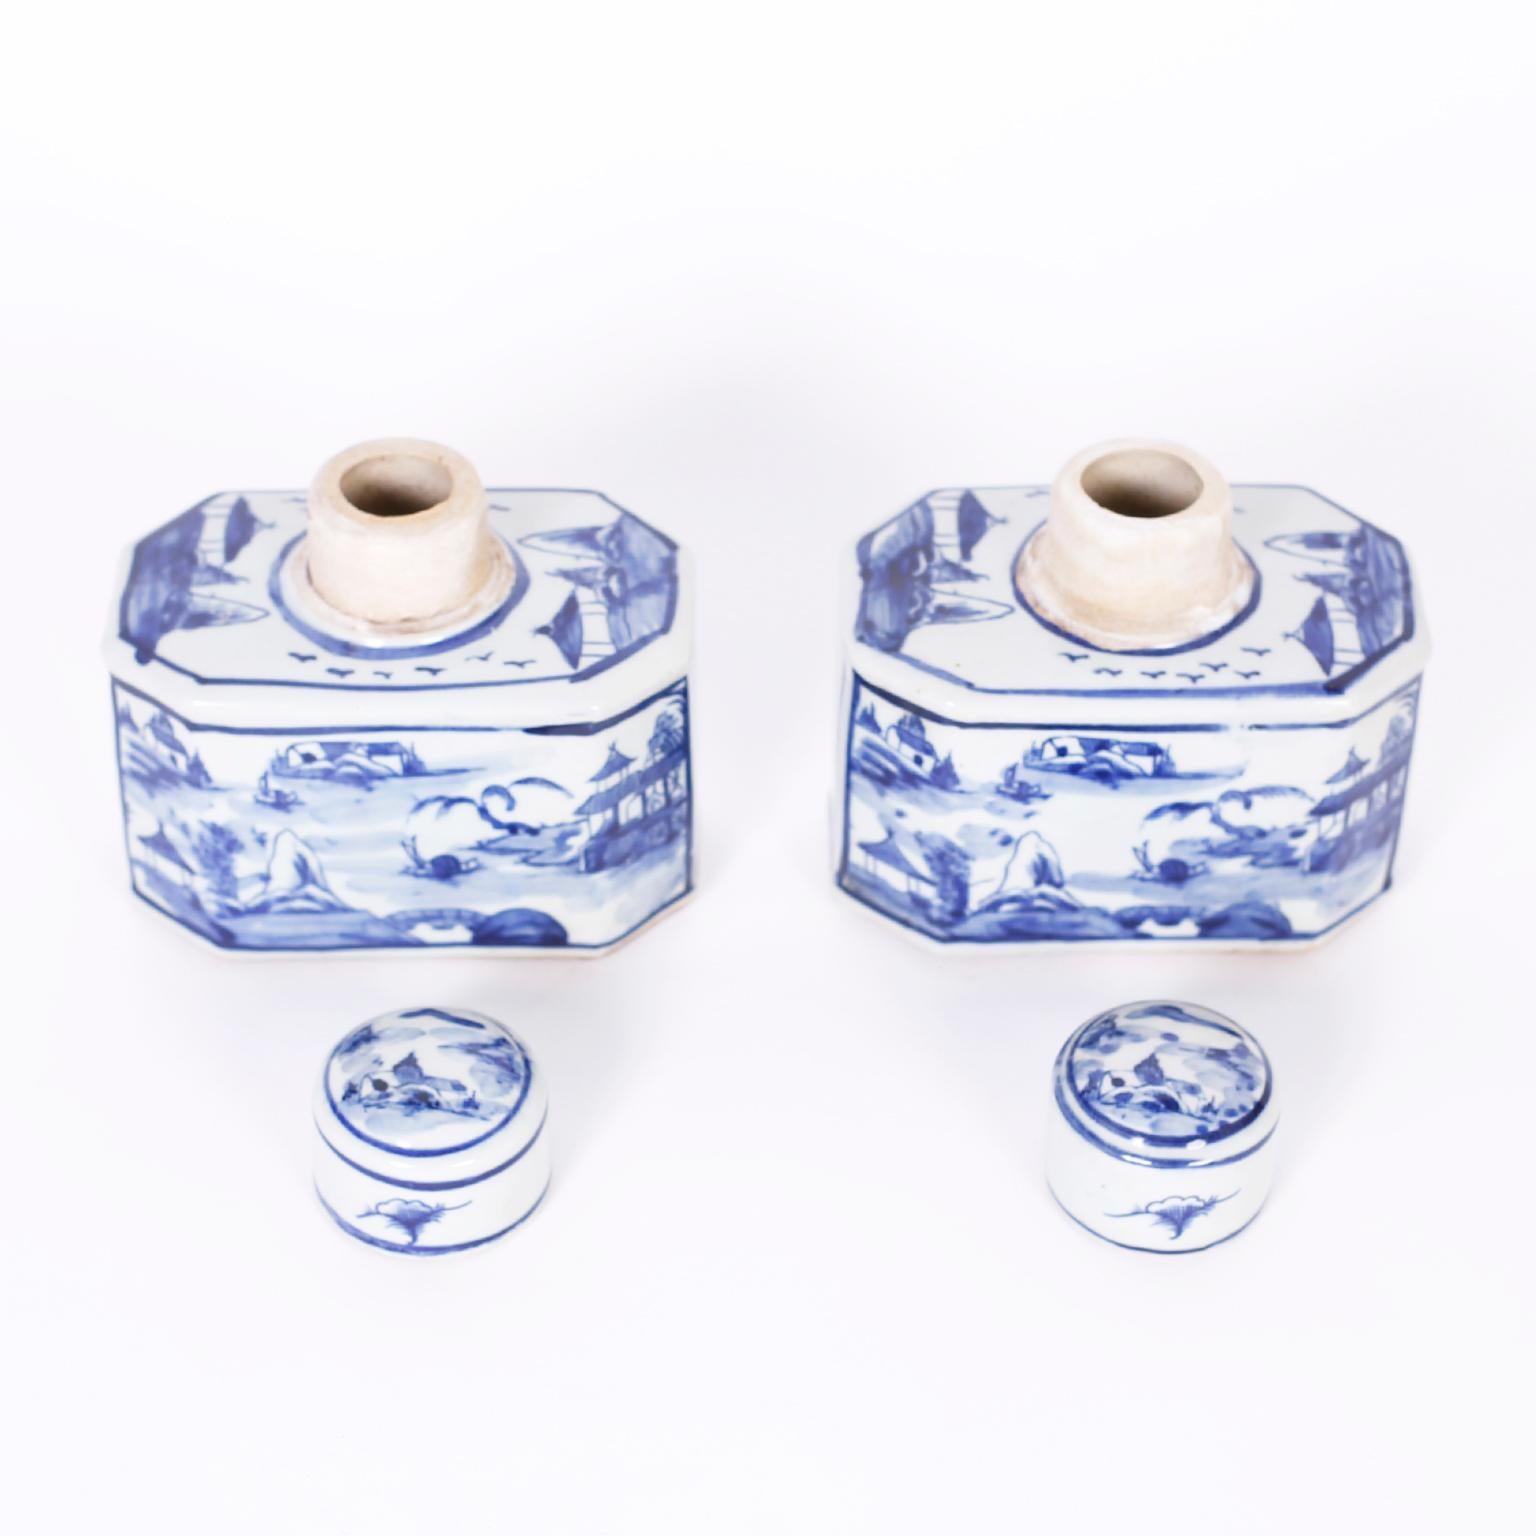 Chinoiserie Pair of Chinese Blue and White Porcelain Tea Caddies with Landscapes